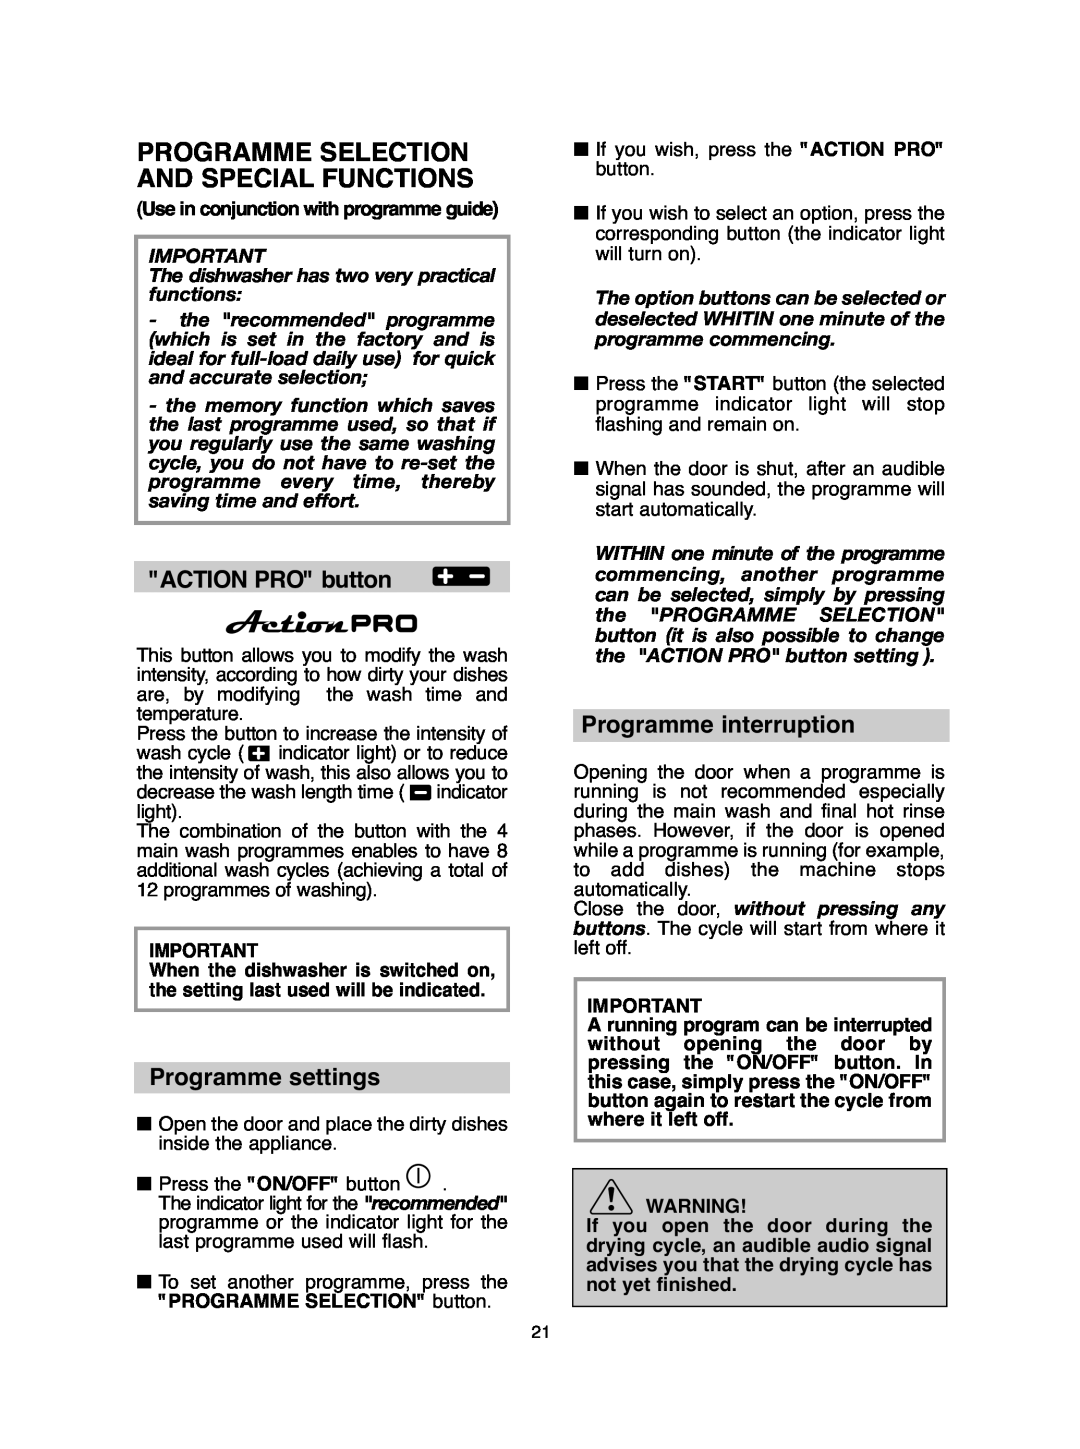 Hoover DDY 062 Programme Selection And Special Functions, ACTION PRO button, Programme settings, Programme interruption 